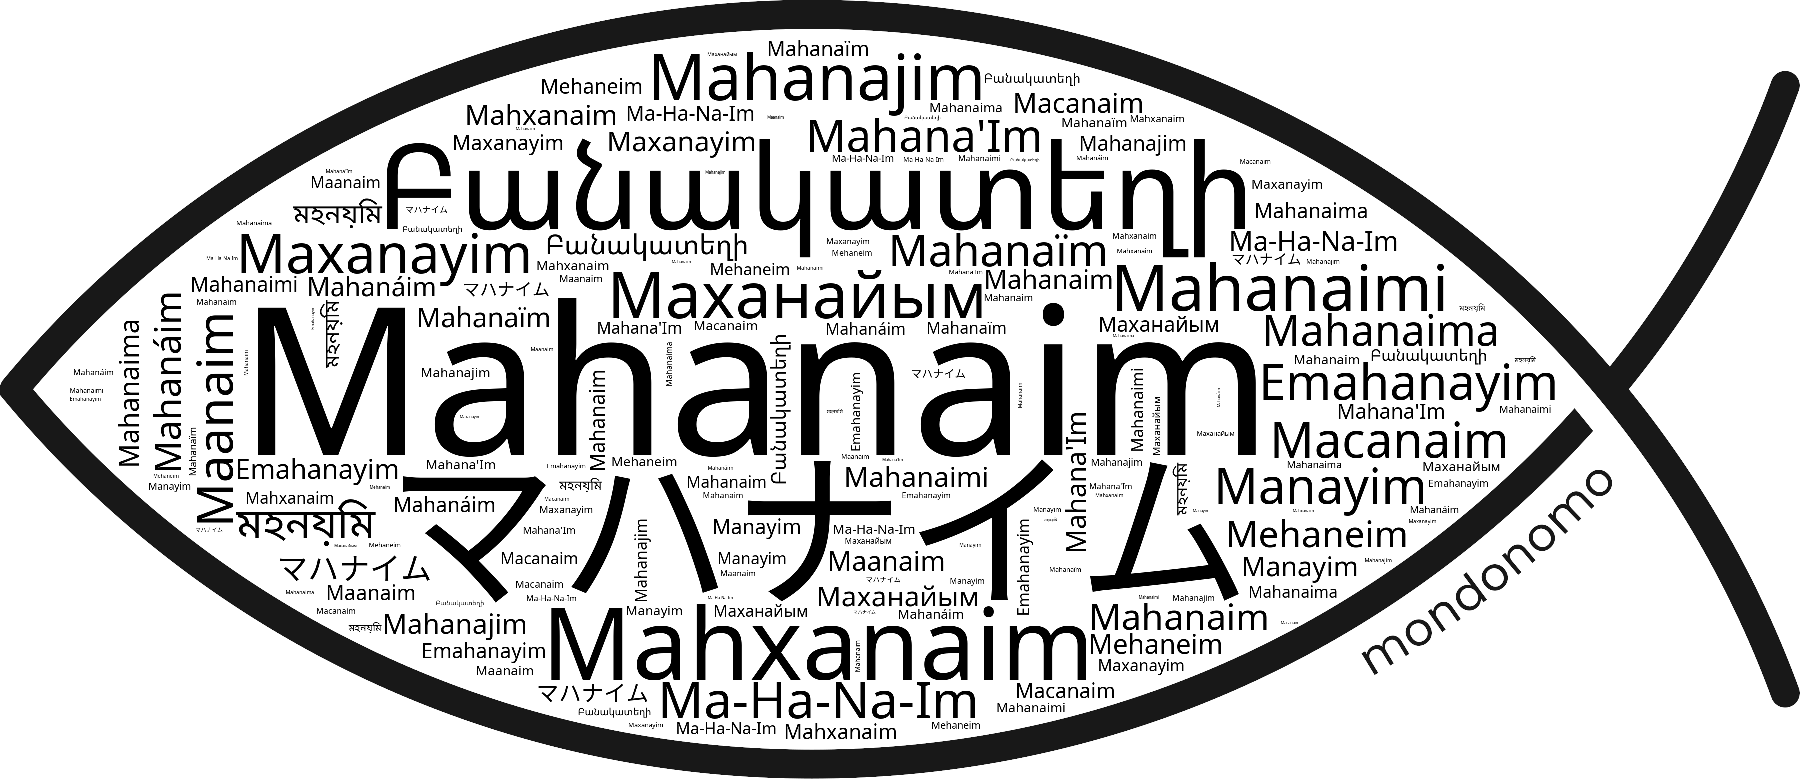 Name Mahanaim in the world's Bibles